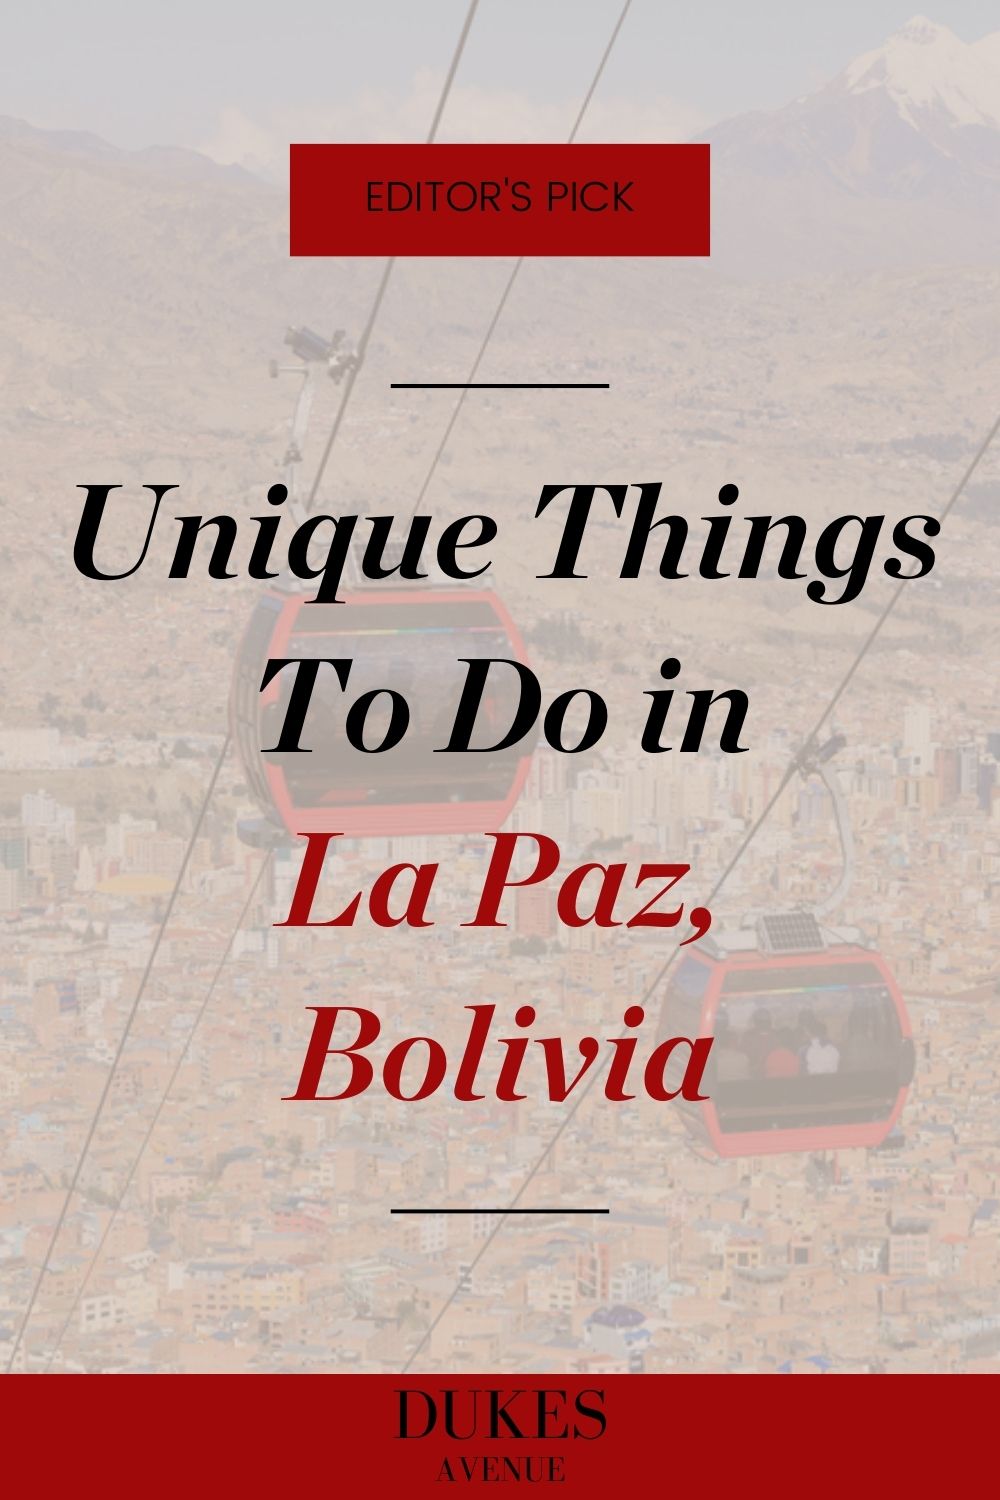 Image of a cable car over the mountains in La Paz, Bolivia with text overlay 'Unique Things to Do in La Paz, Bolivia'